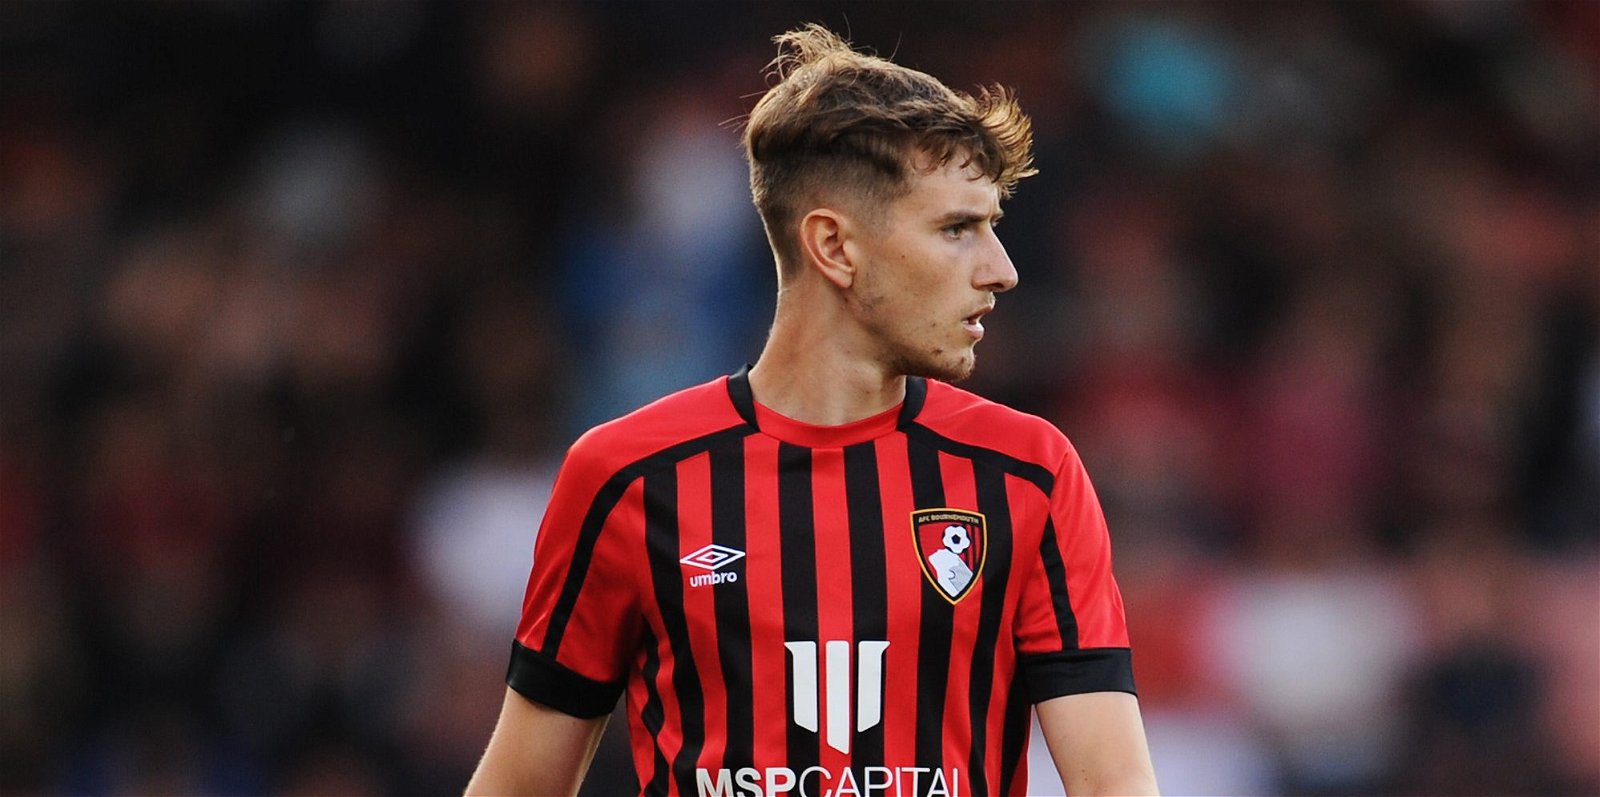 Bournemouth, &#8216;Pathetic&#8217;, &#8216;Absolutely unforgiveable&#8217; &#8211; Plenty of Bournemouth fans left fuming as 24-y/o sees red